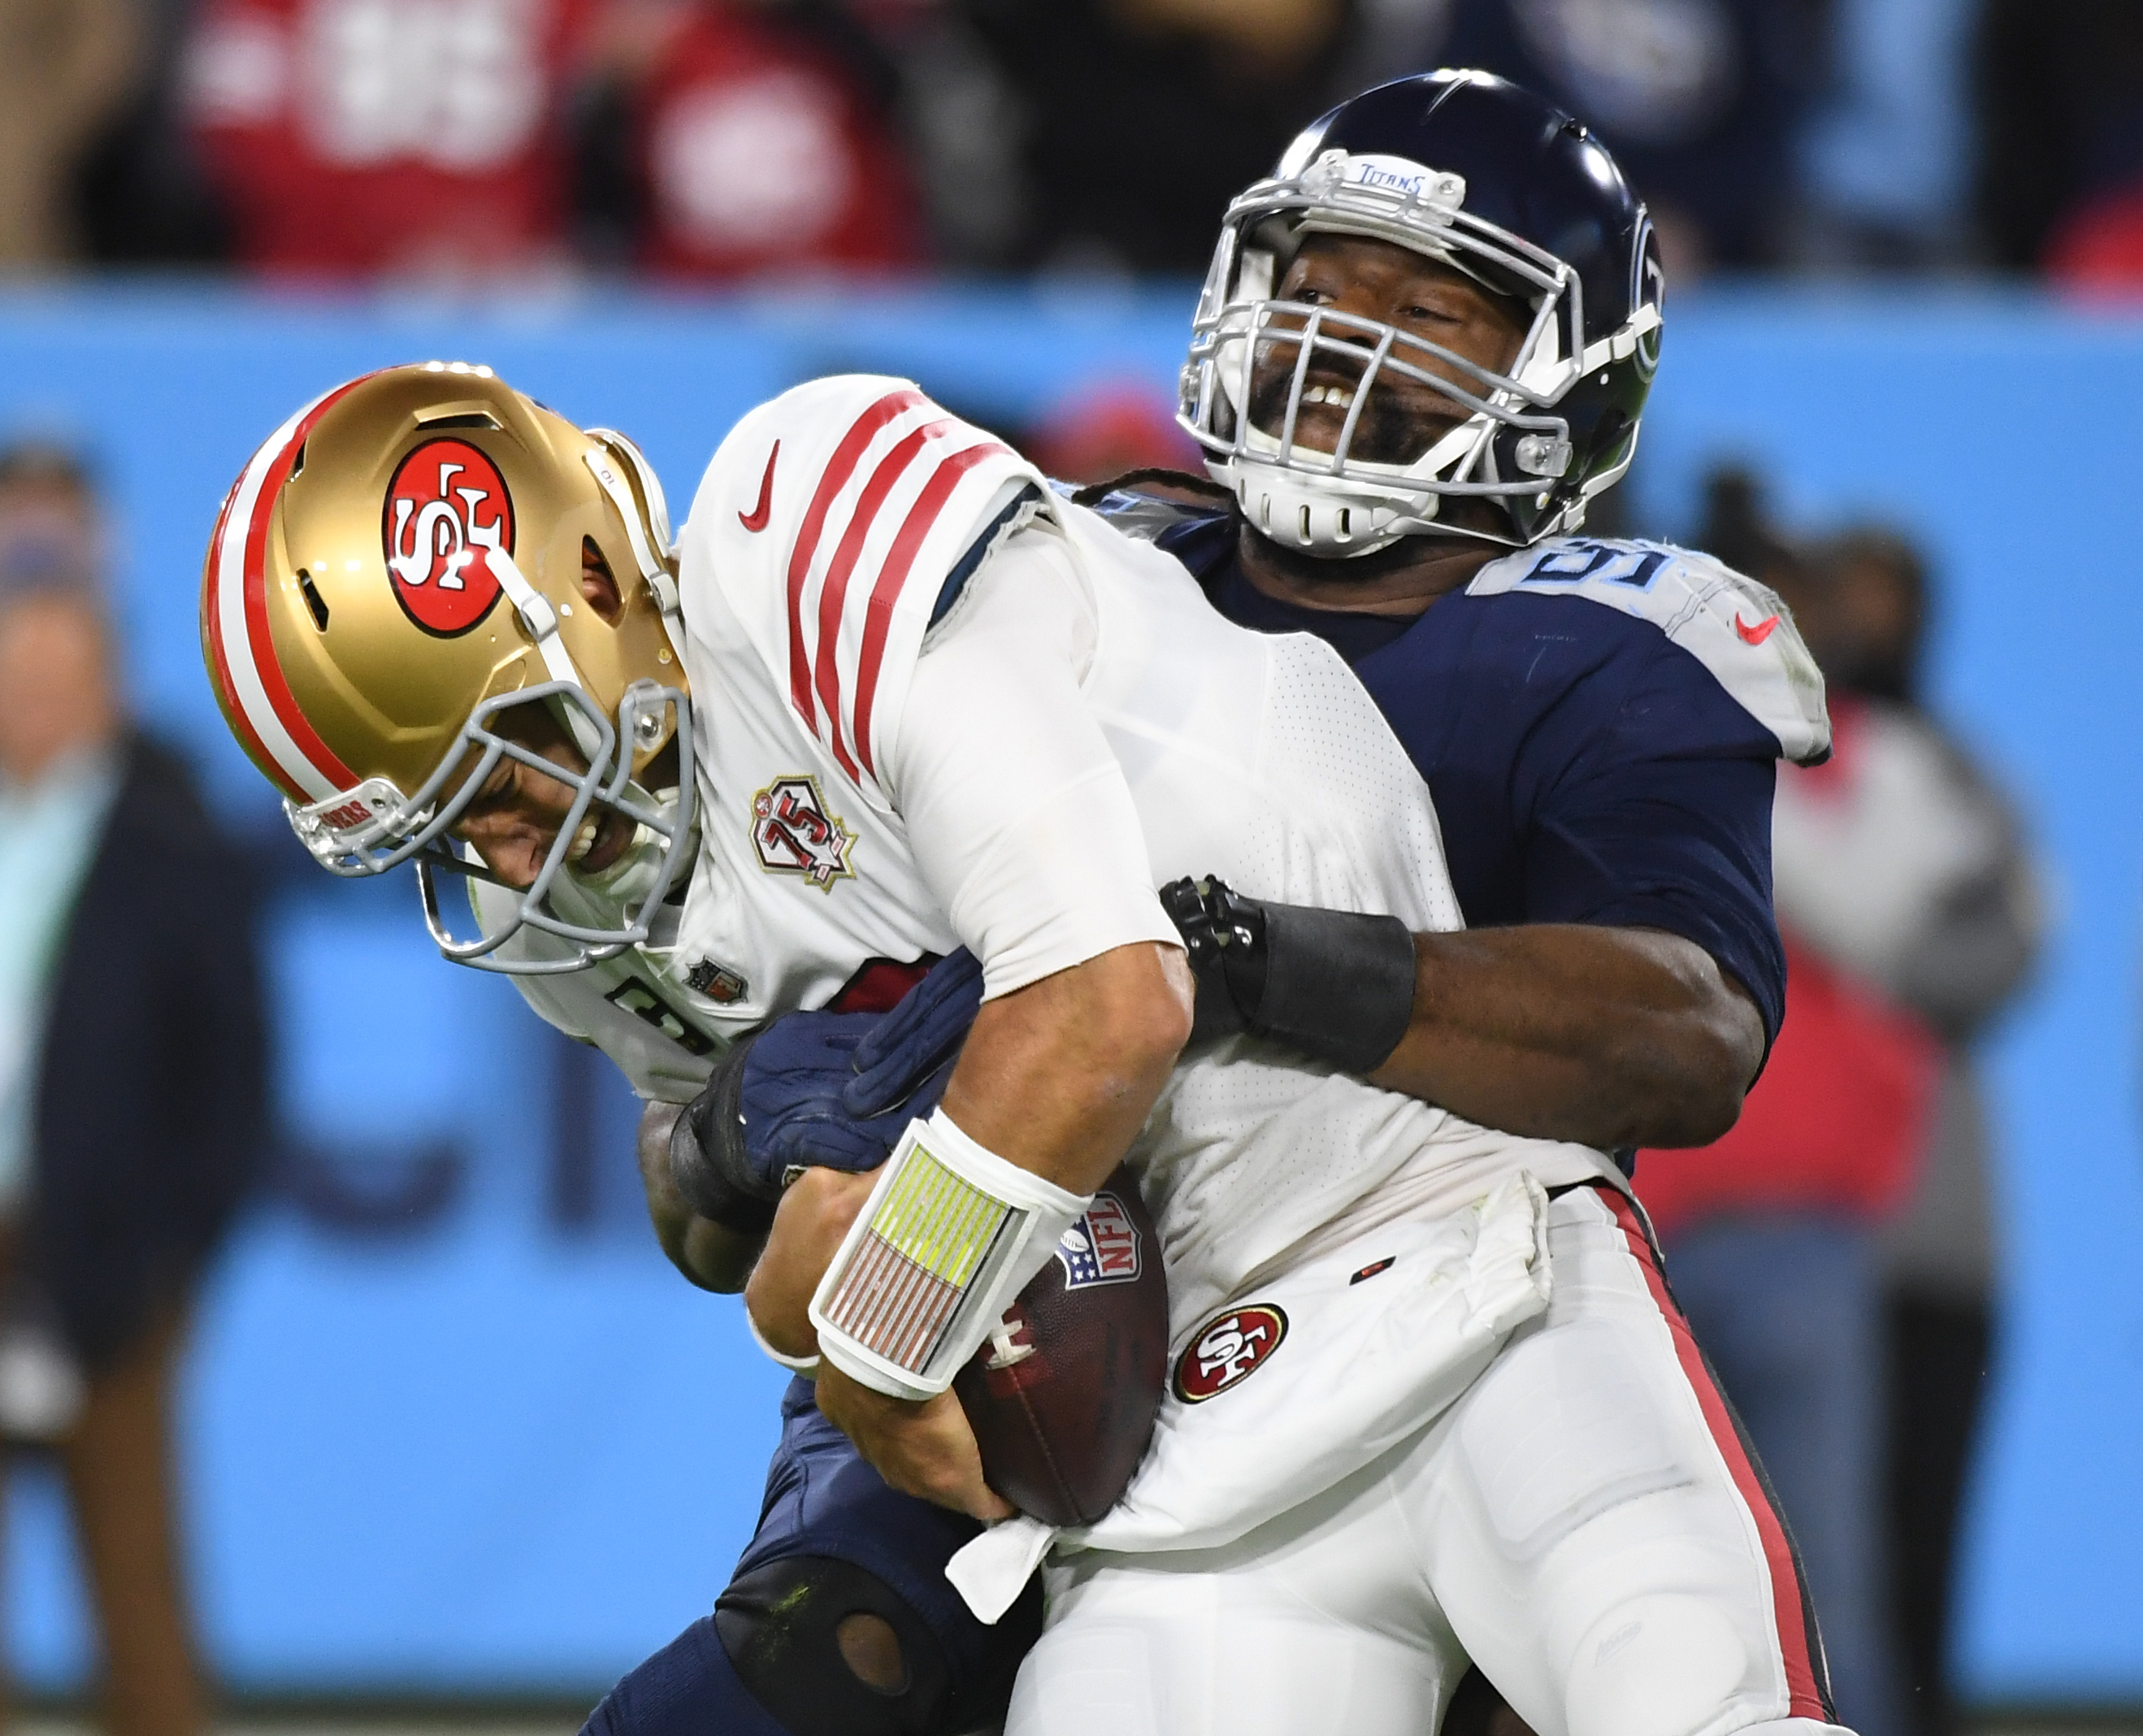 NFL: San Francisco 49ers at Tennessee Titans